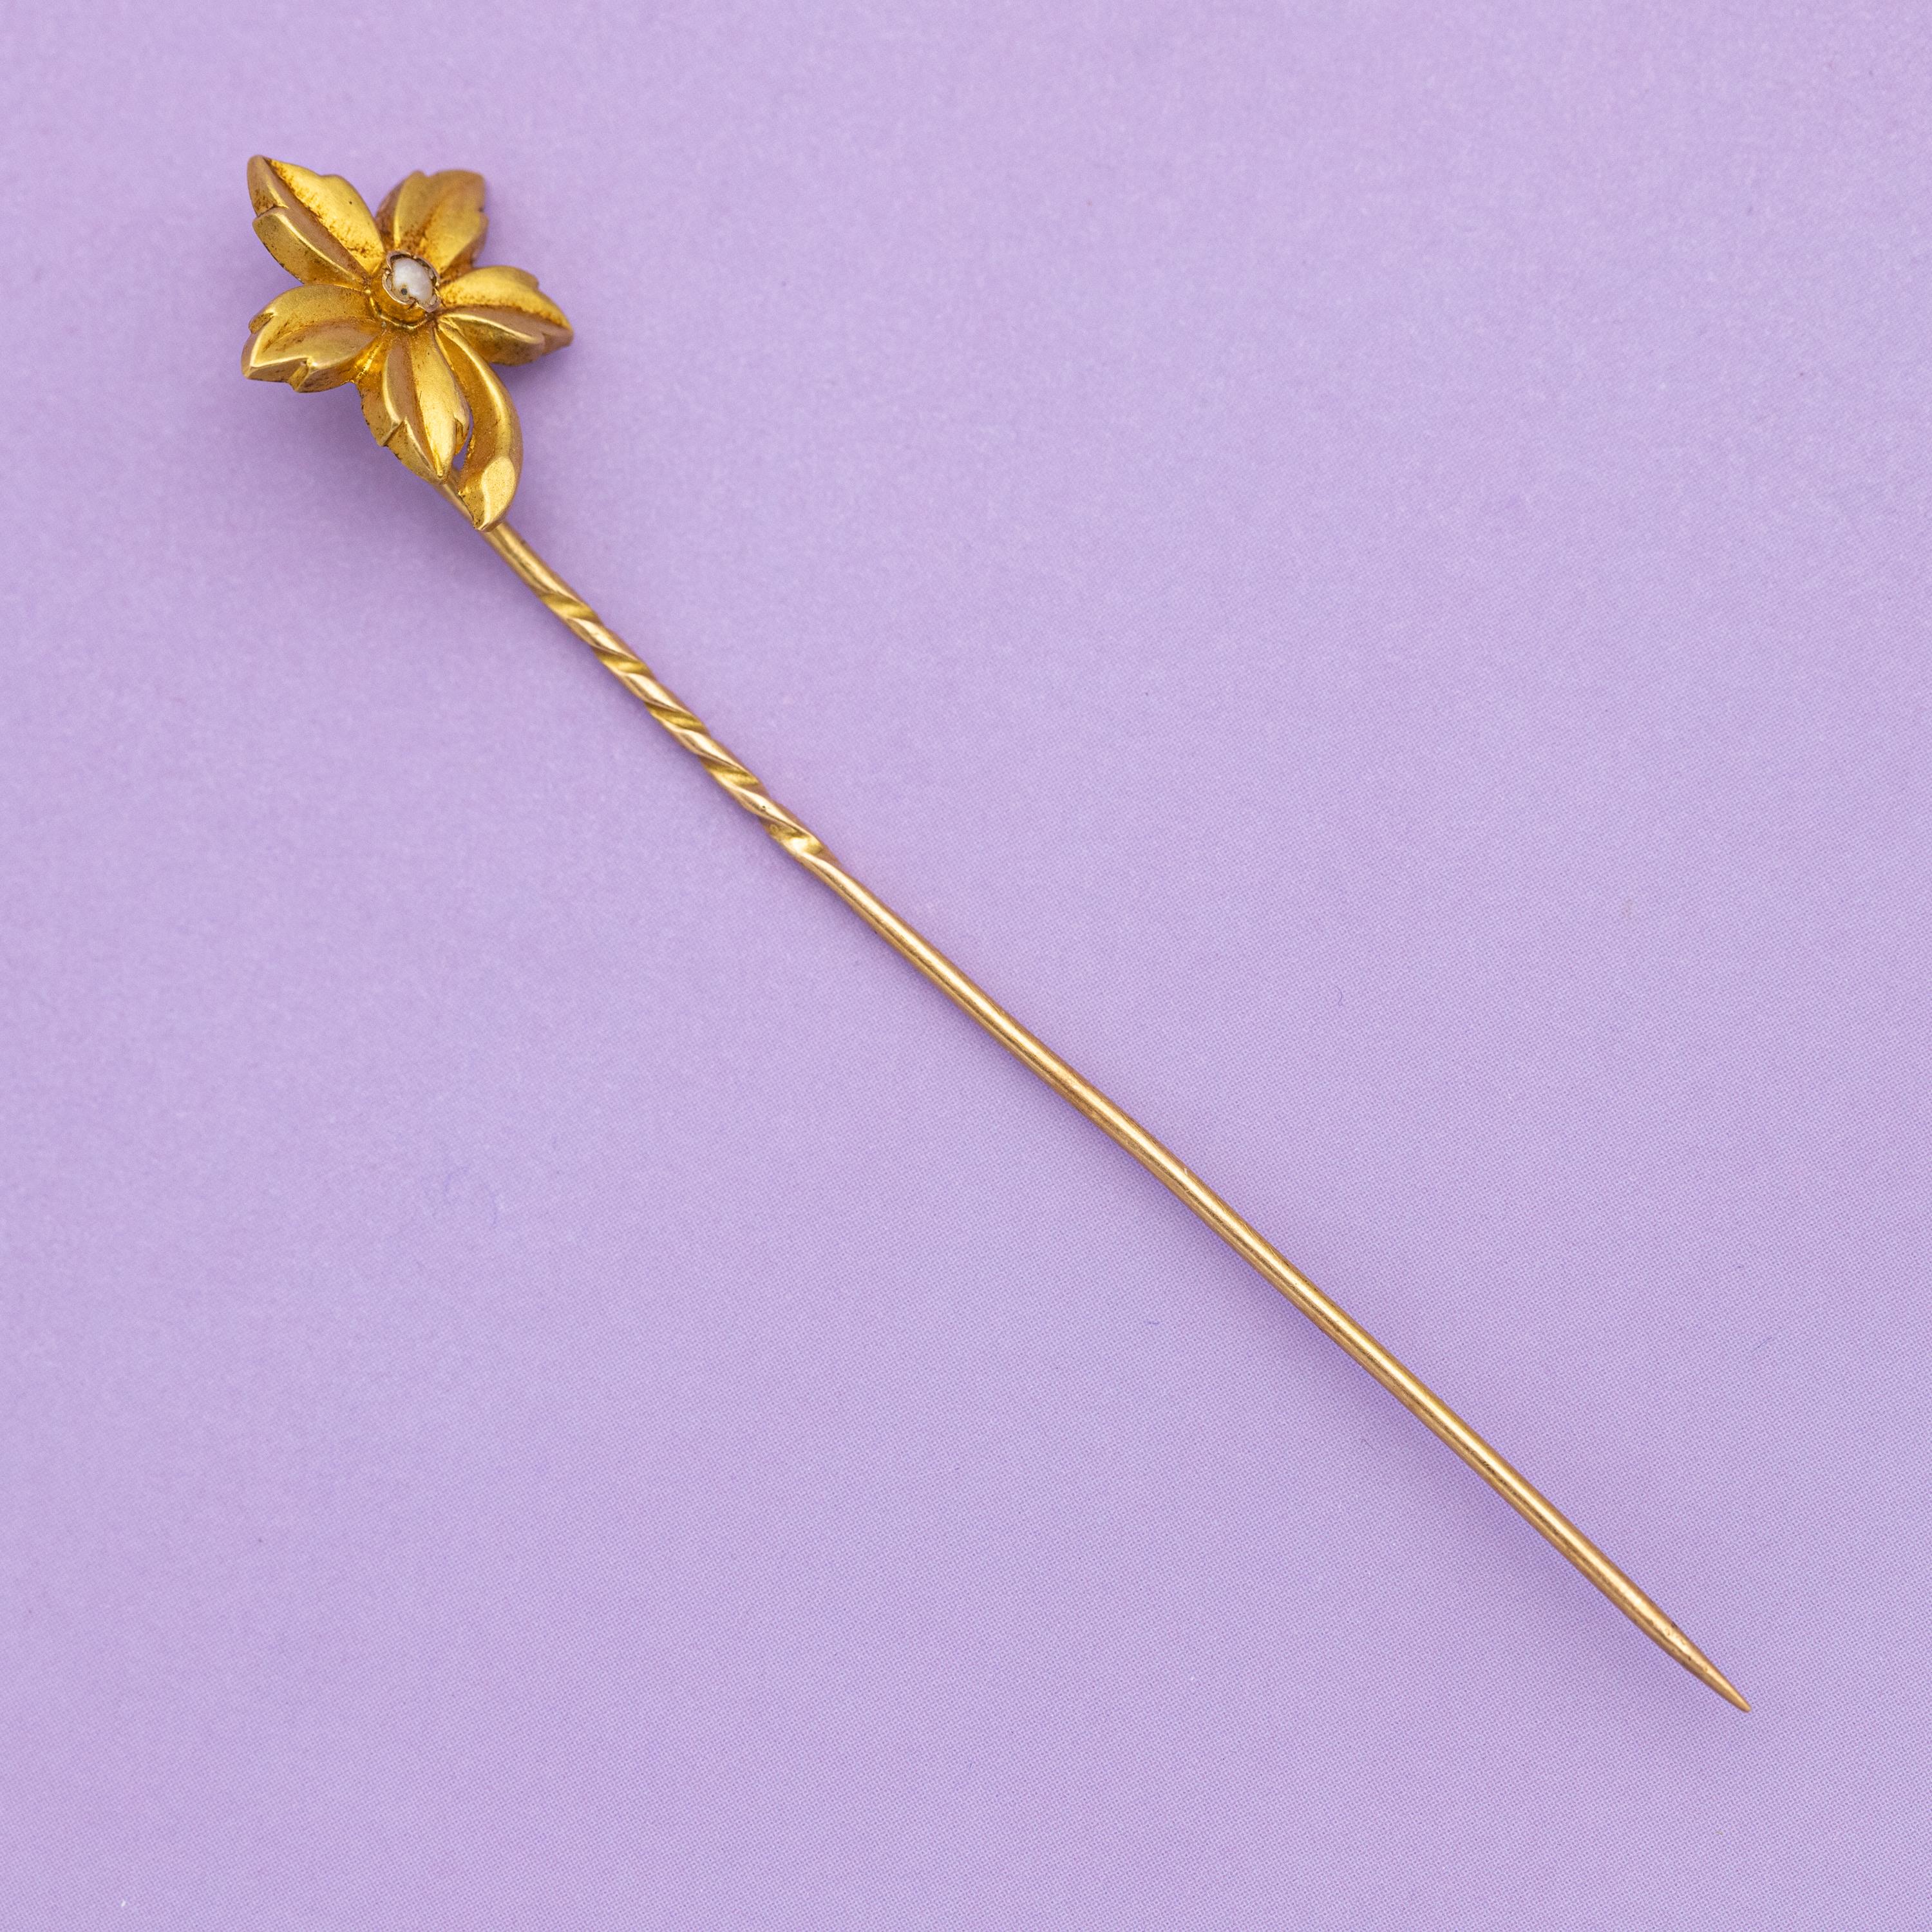 For sale is this stunning Victorian leaf pin. This lovely antique 18k gold pin is very detailed and set with a little seed pearl in its center. On top of that is this stickpin marked with a French eagle head and a makers mark. Ivy leafs stand for